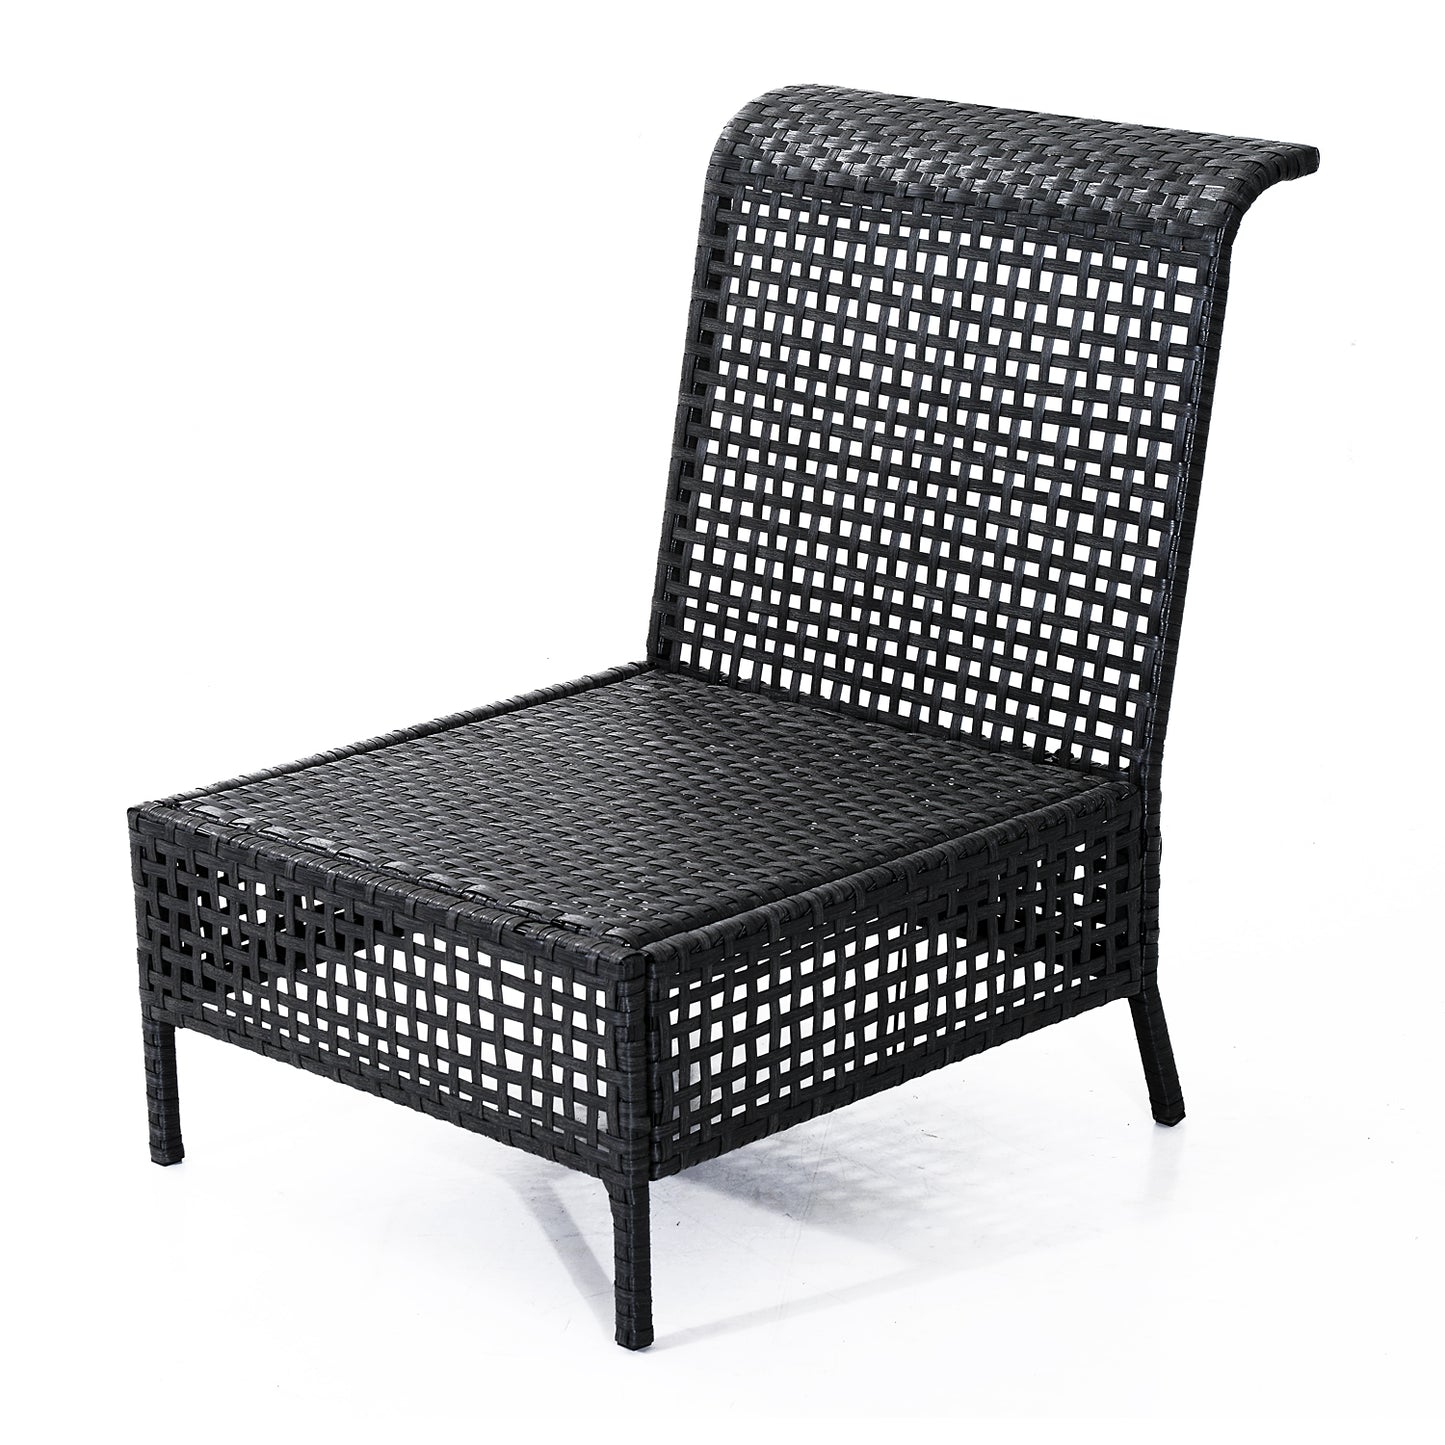 Outsunny Rattan Armless Chair, 80Lx60Wx82H cm-Black/Beige